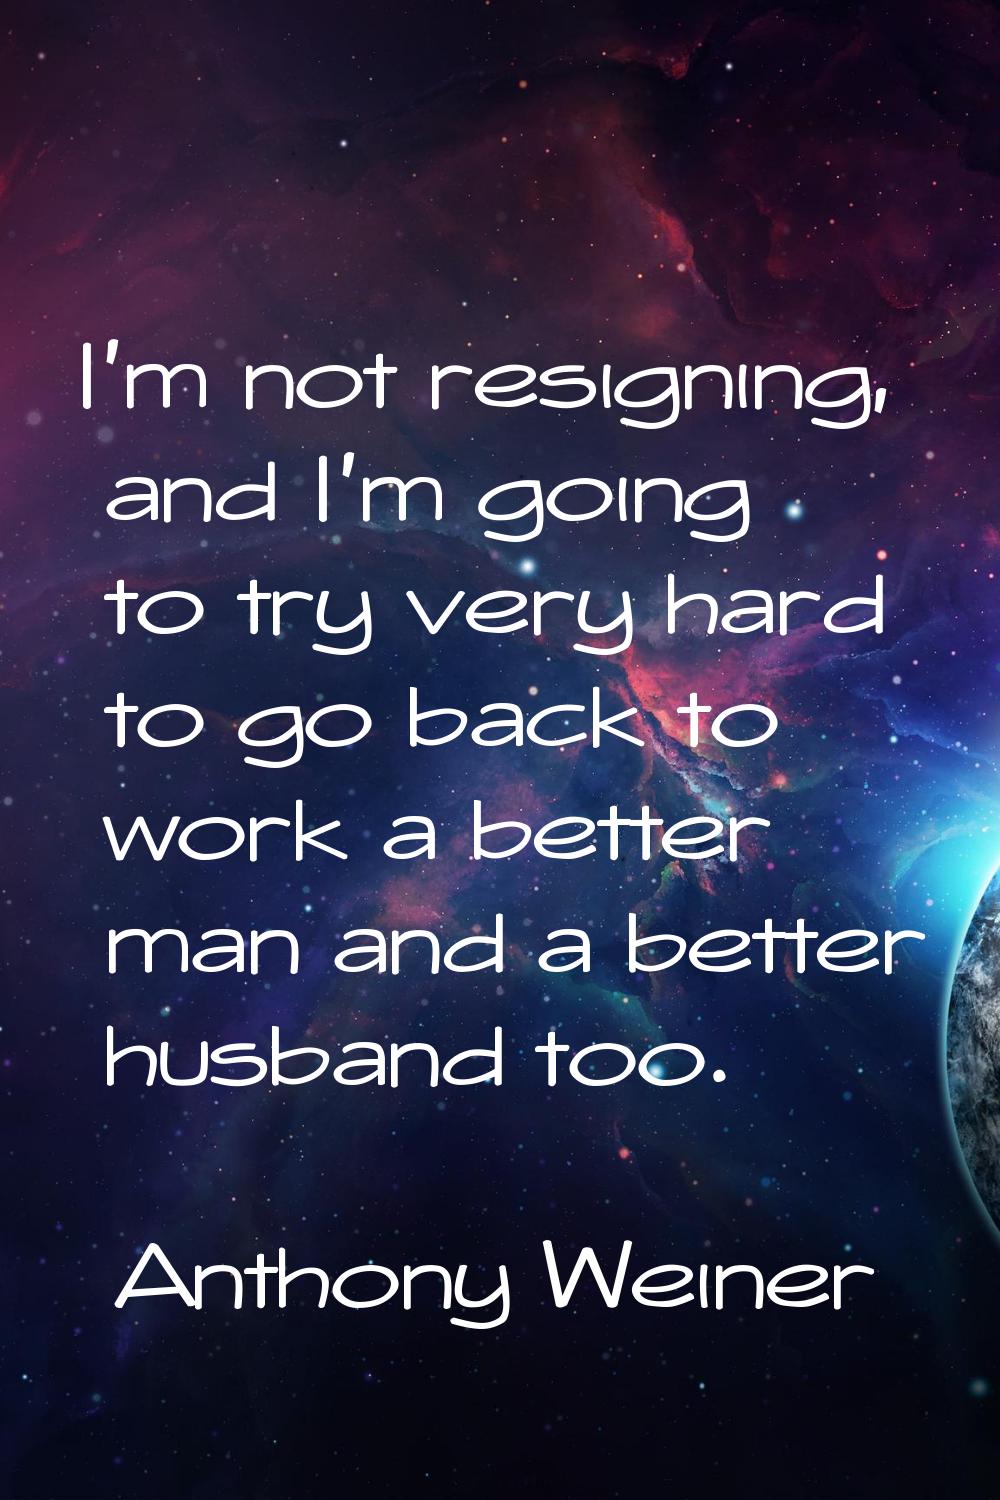 I'm not resigning, and I'm going to try very hard to go back to work a better man and a better husb